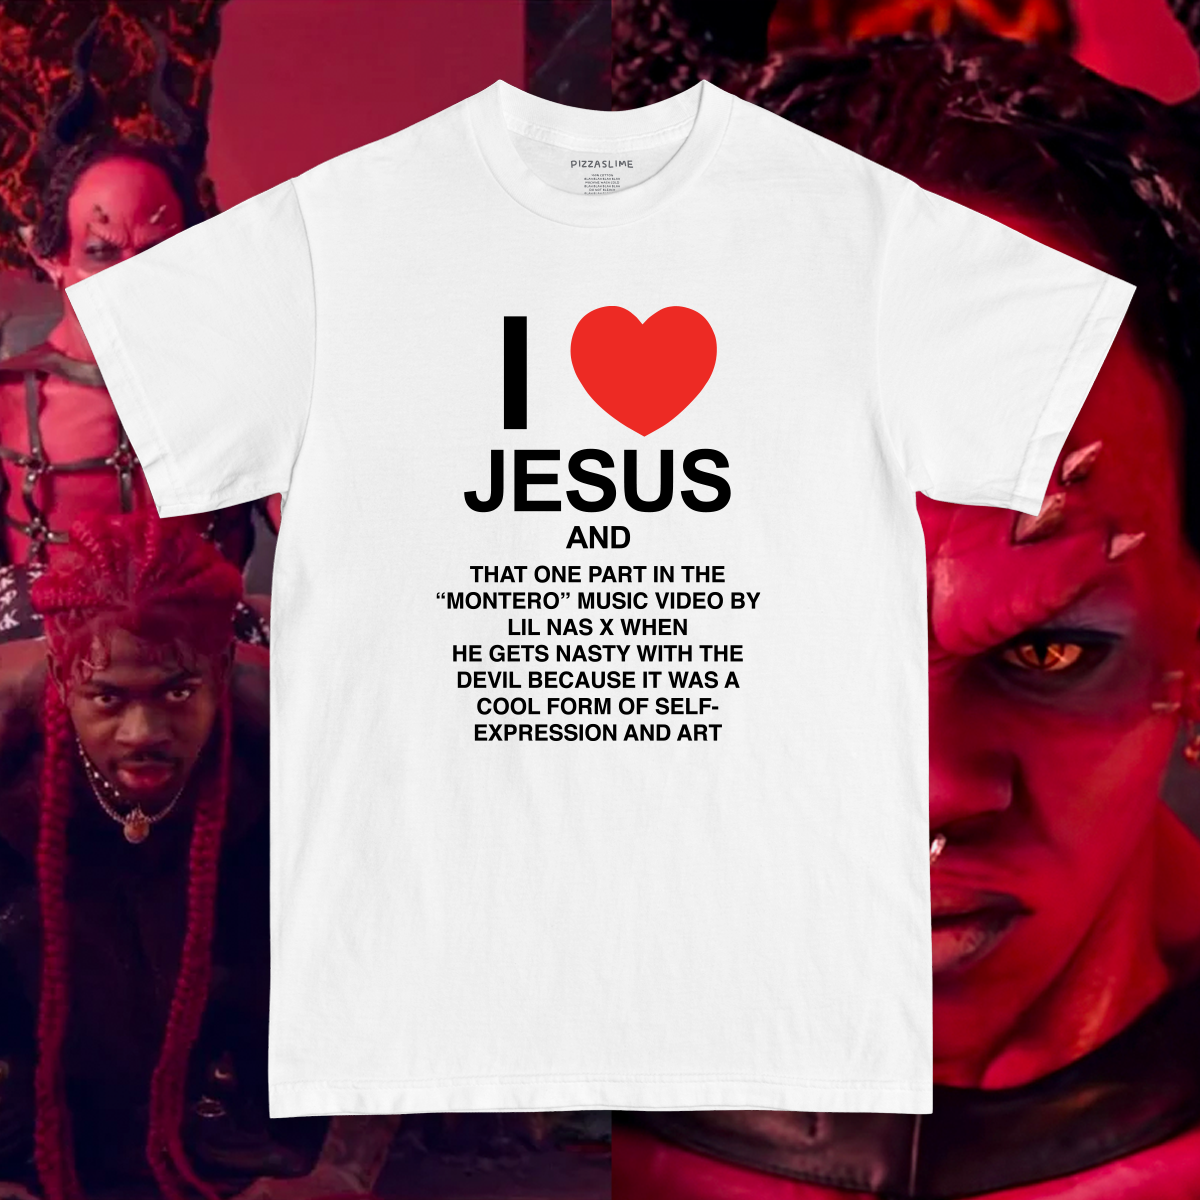 Lil Nas X + Pizzaslime Official!  I love Jesus and Montero T-Shirt (White)